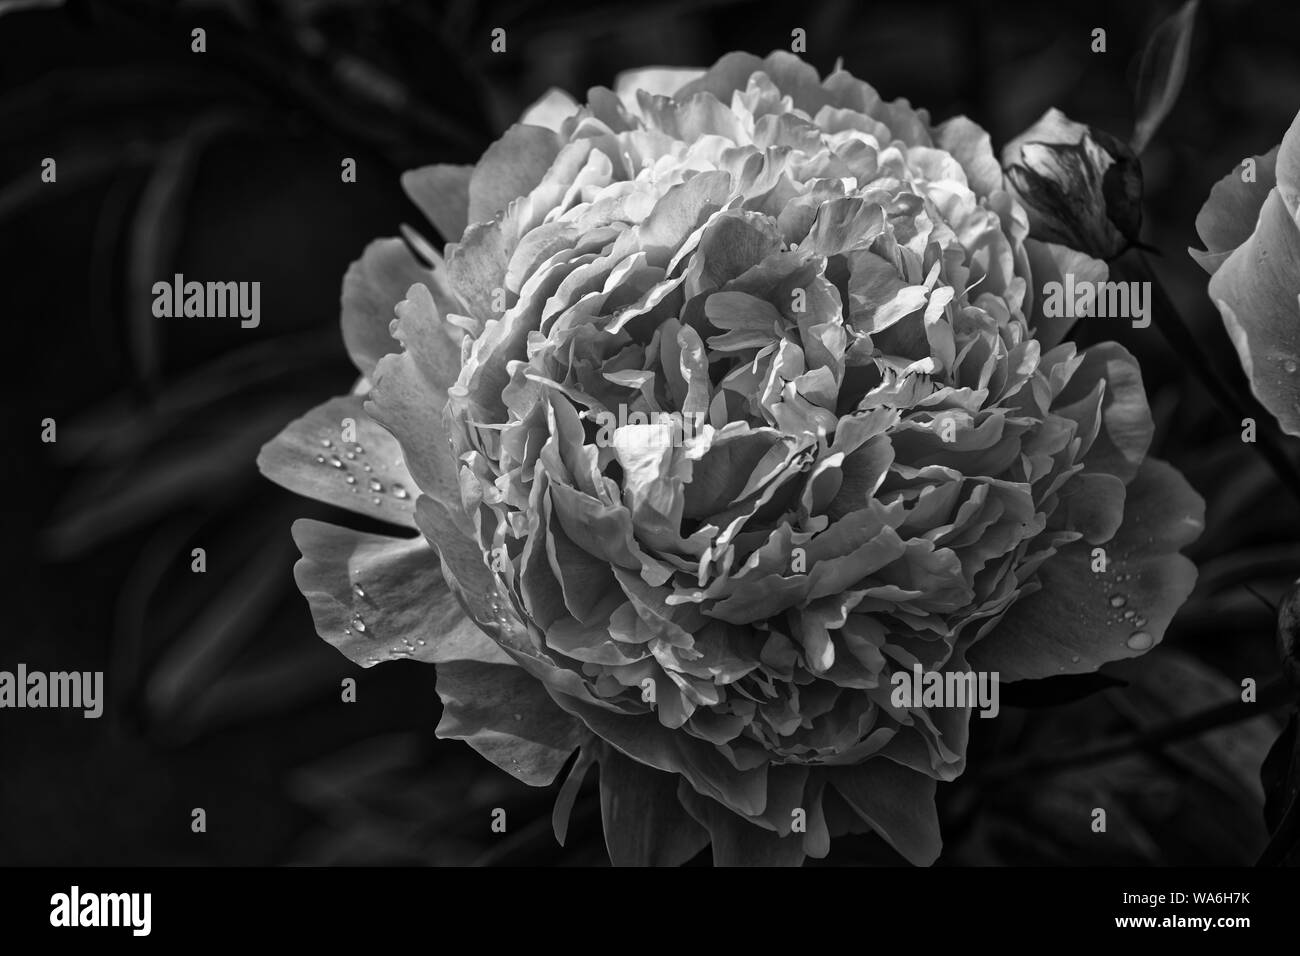 Peony (lat. Paeónia) - genus of herbaceous perennials. The only genus of the family peony (Paeoniaceae). garden flowers Stock Photo